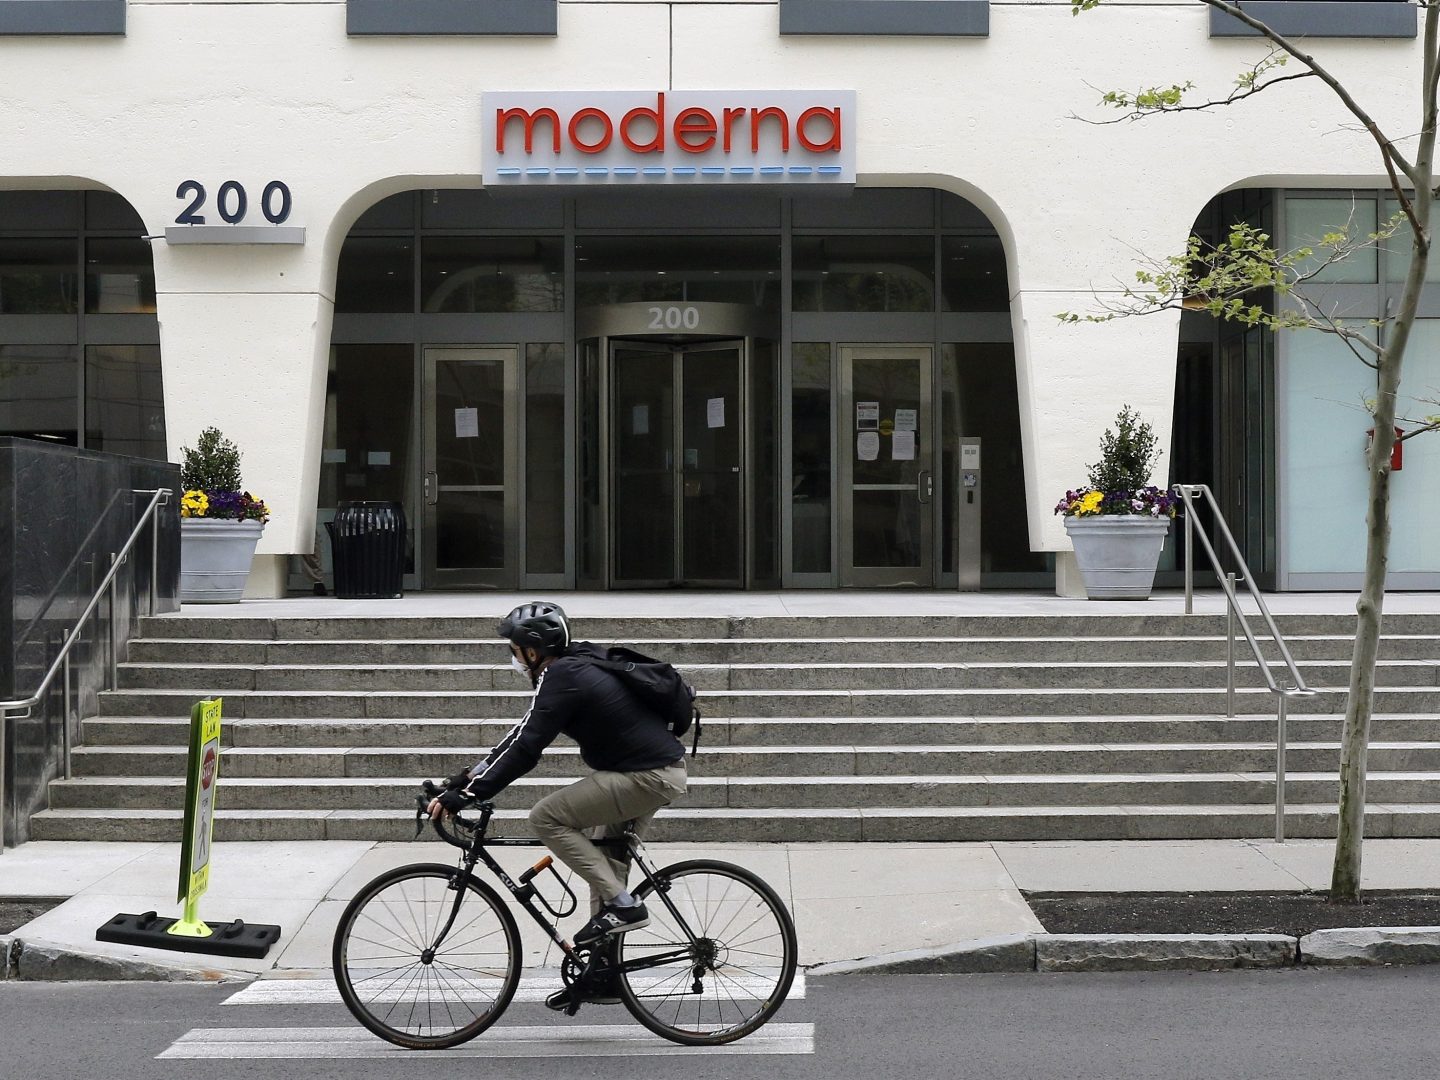 FILE PHOTO: In this May 18, 2020, file photo, a bicyclist pedals past an entrance to a Moderna, Inc., building in Cambridge, Mass.